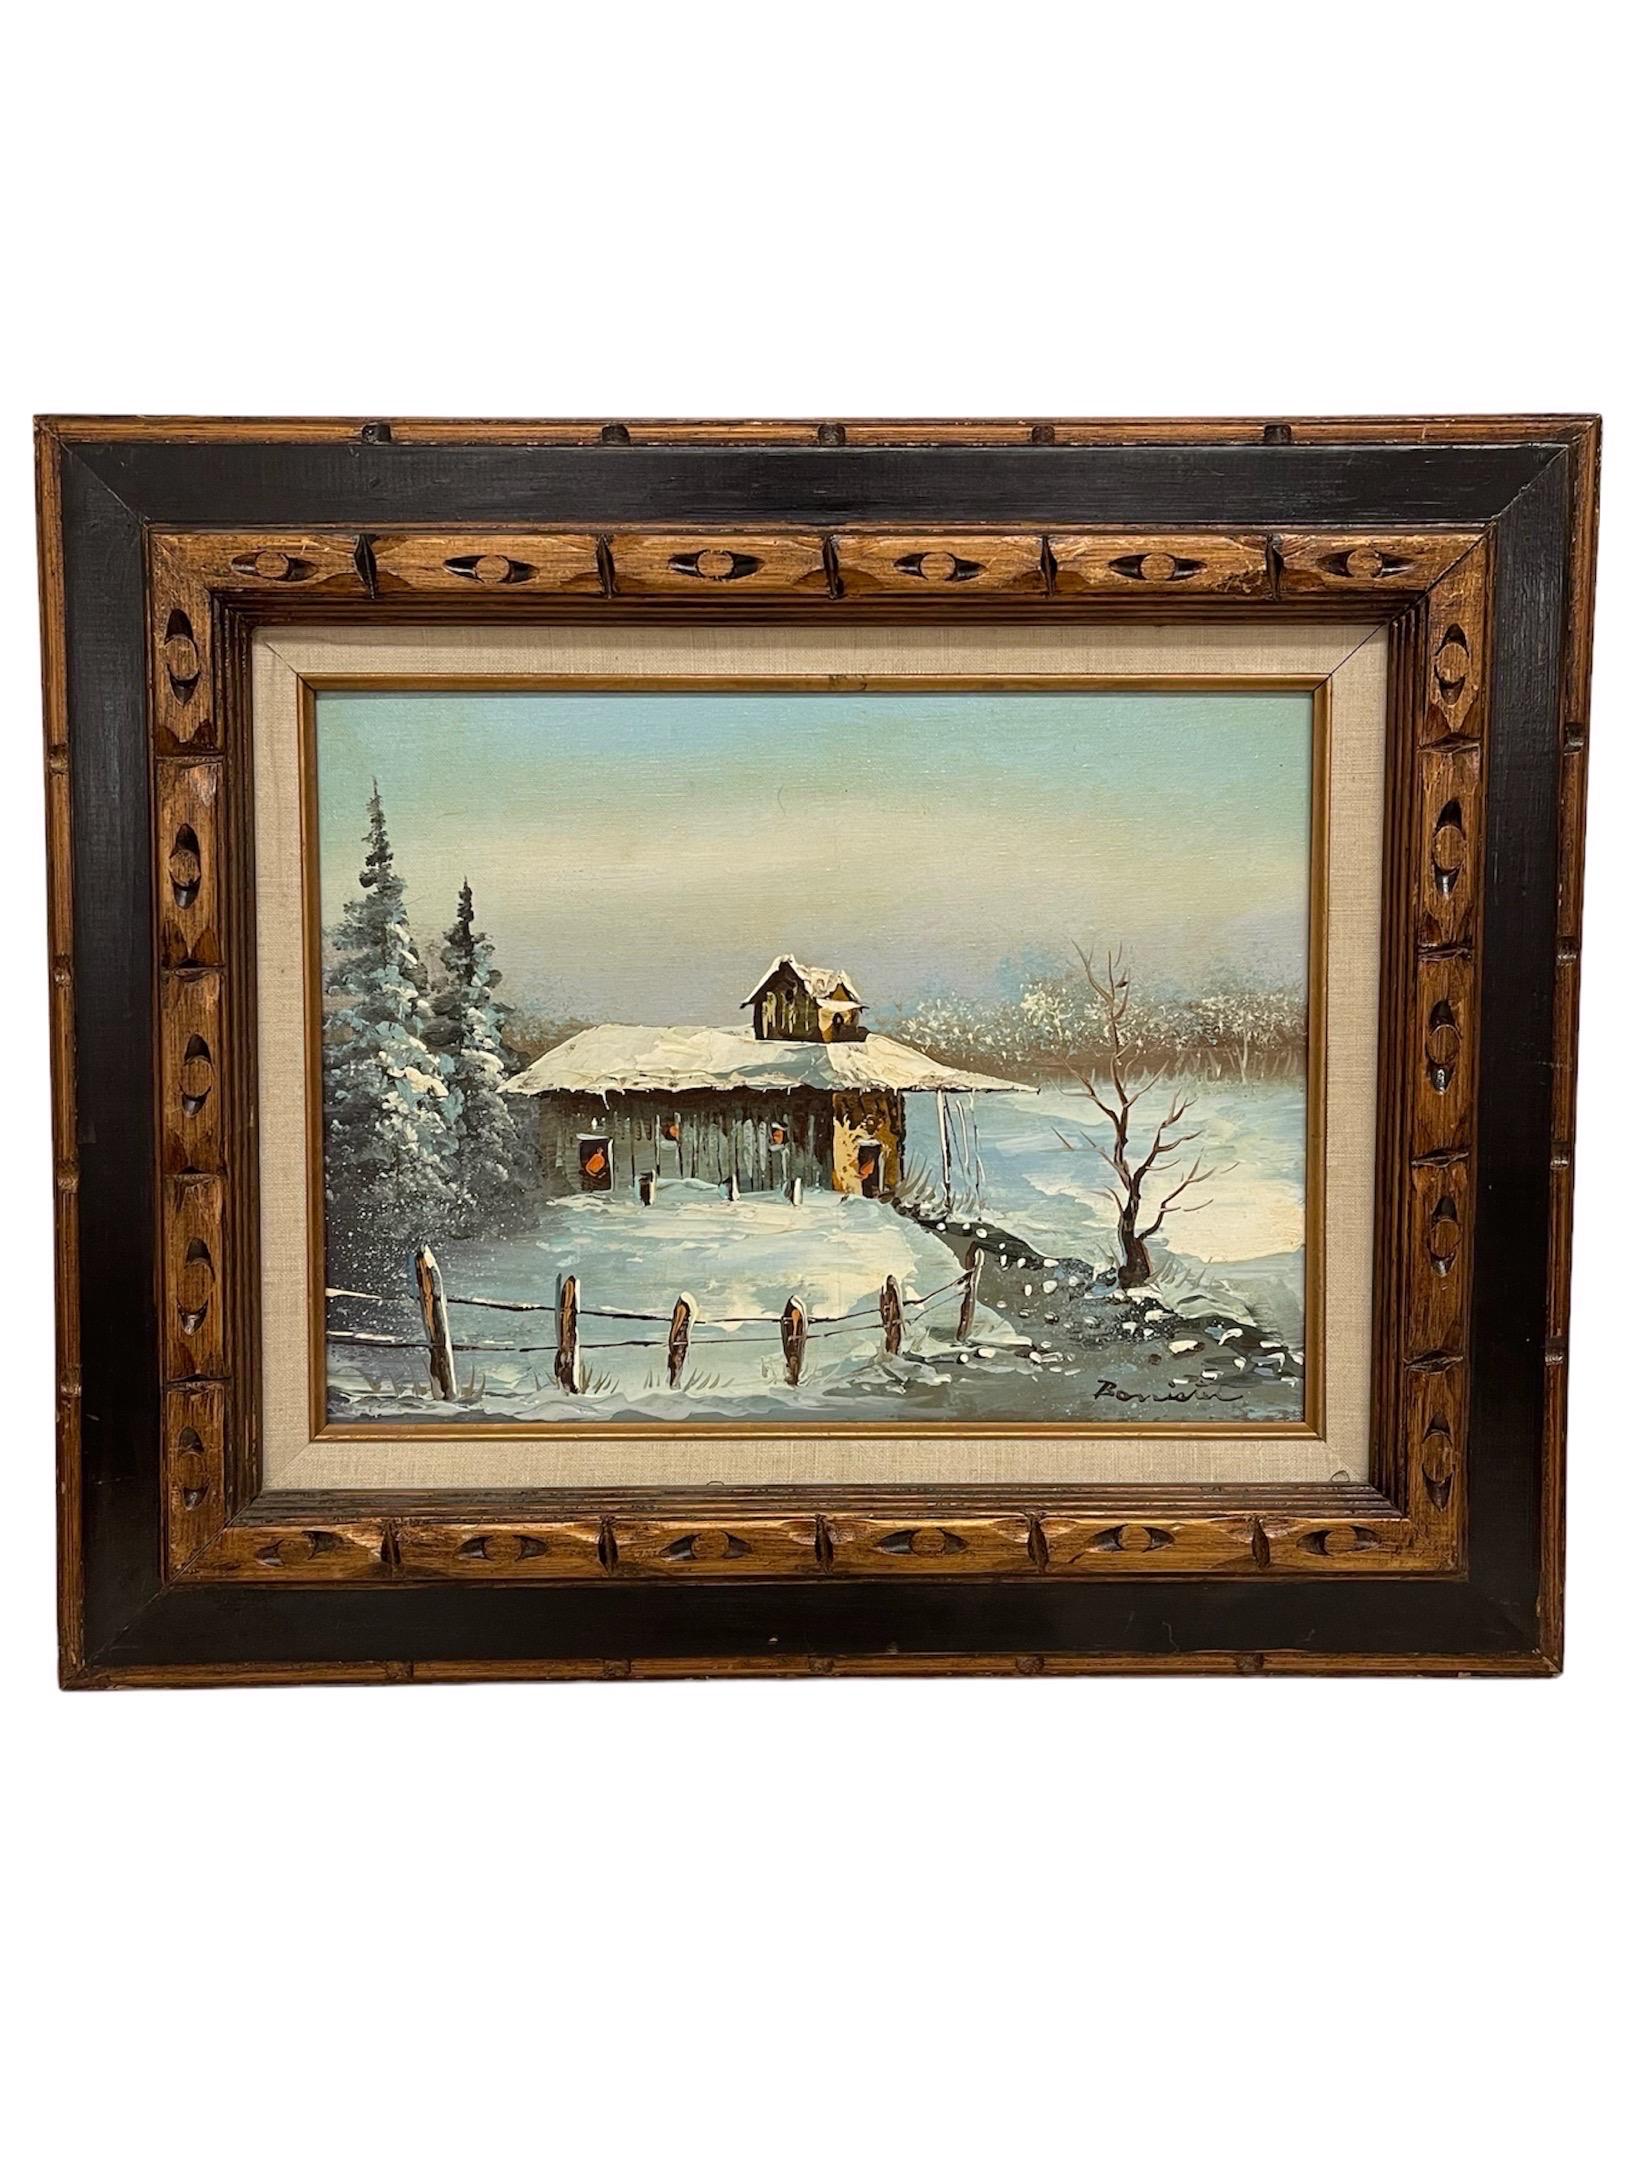 Vintage Signed Painting of Winter Cabin on Canvas.

Dimensions. 23 1/2 L ; 19 1/2 H